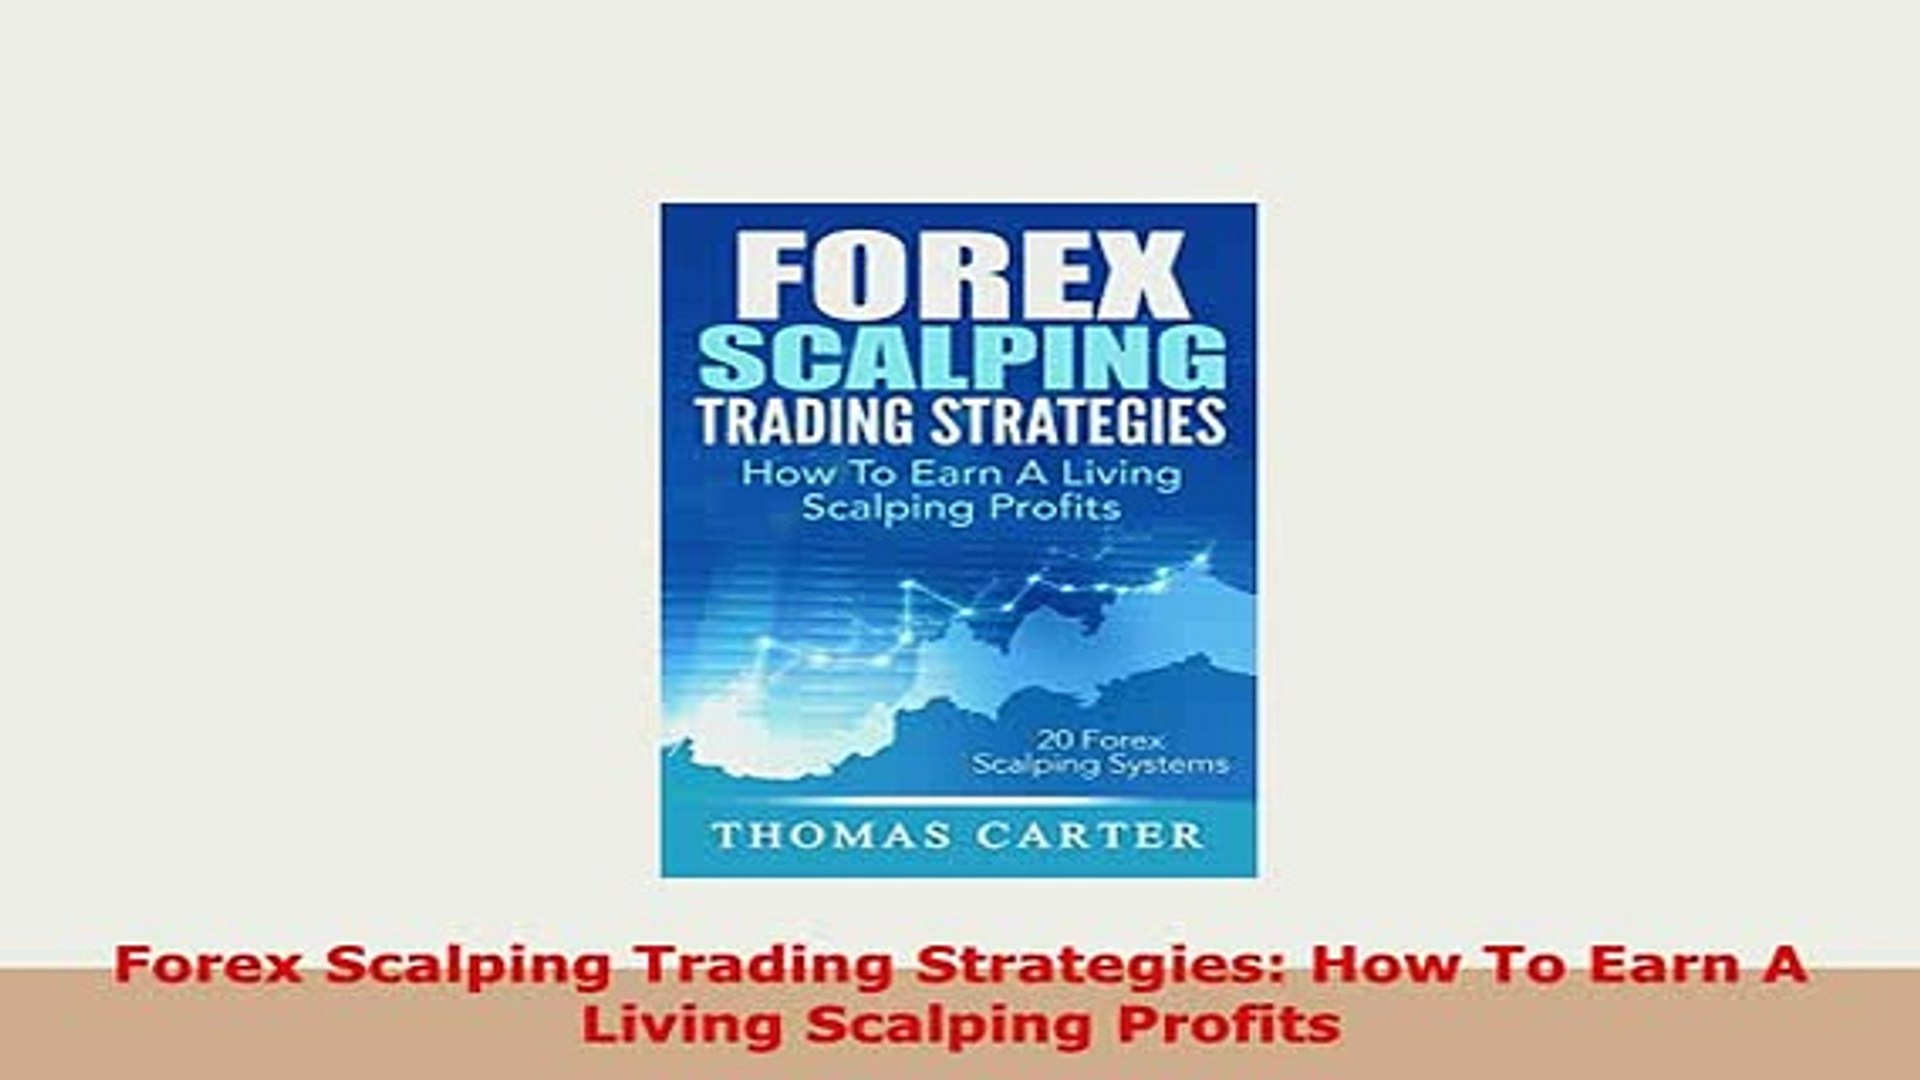 Pdf Forex Scalping Trading Strategies How To Earn A Living Scalping Profits Pdf Book Free - 